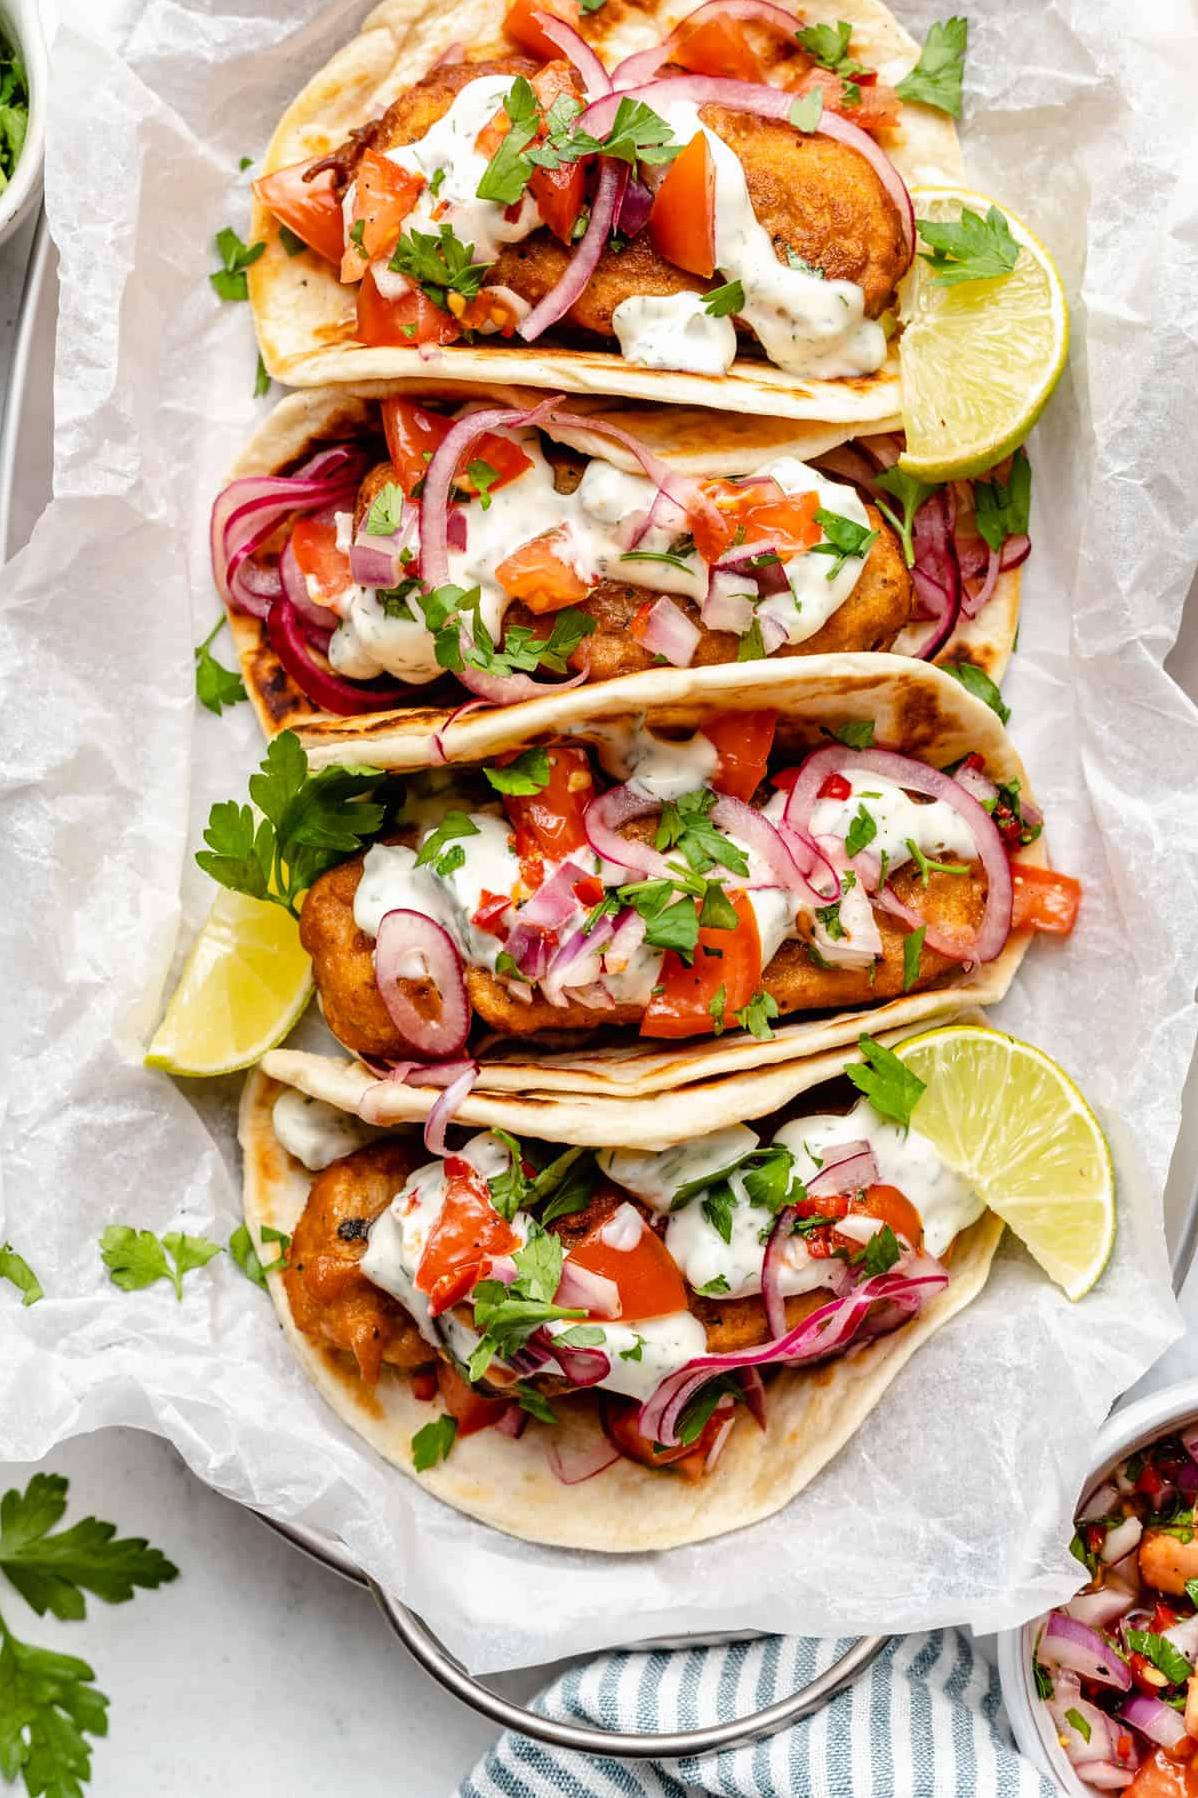  Looking for a plant-based dinner idea? These Vegan Fried 'Fish' Tacos are a must-try.